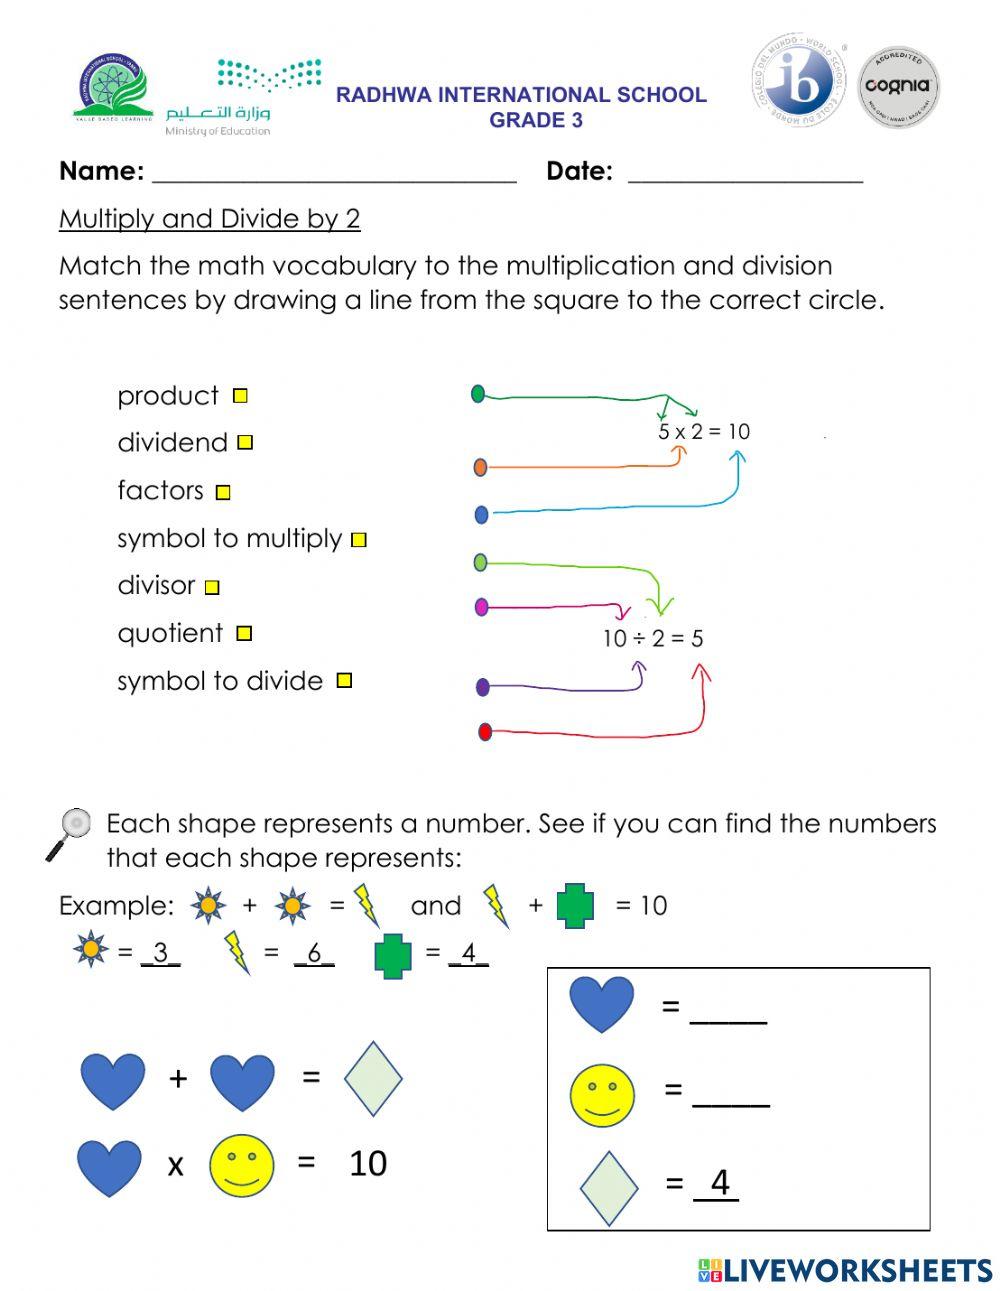 Multiplication and division vocabulary